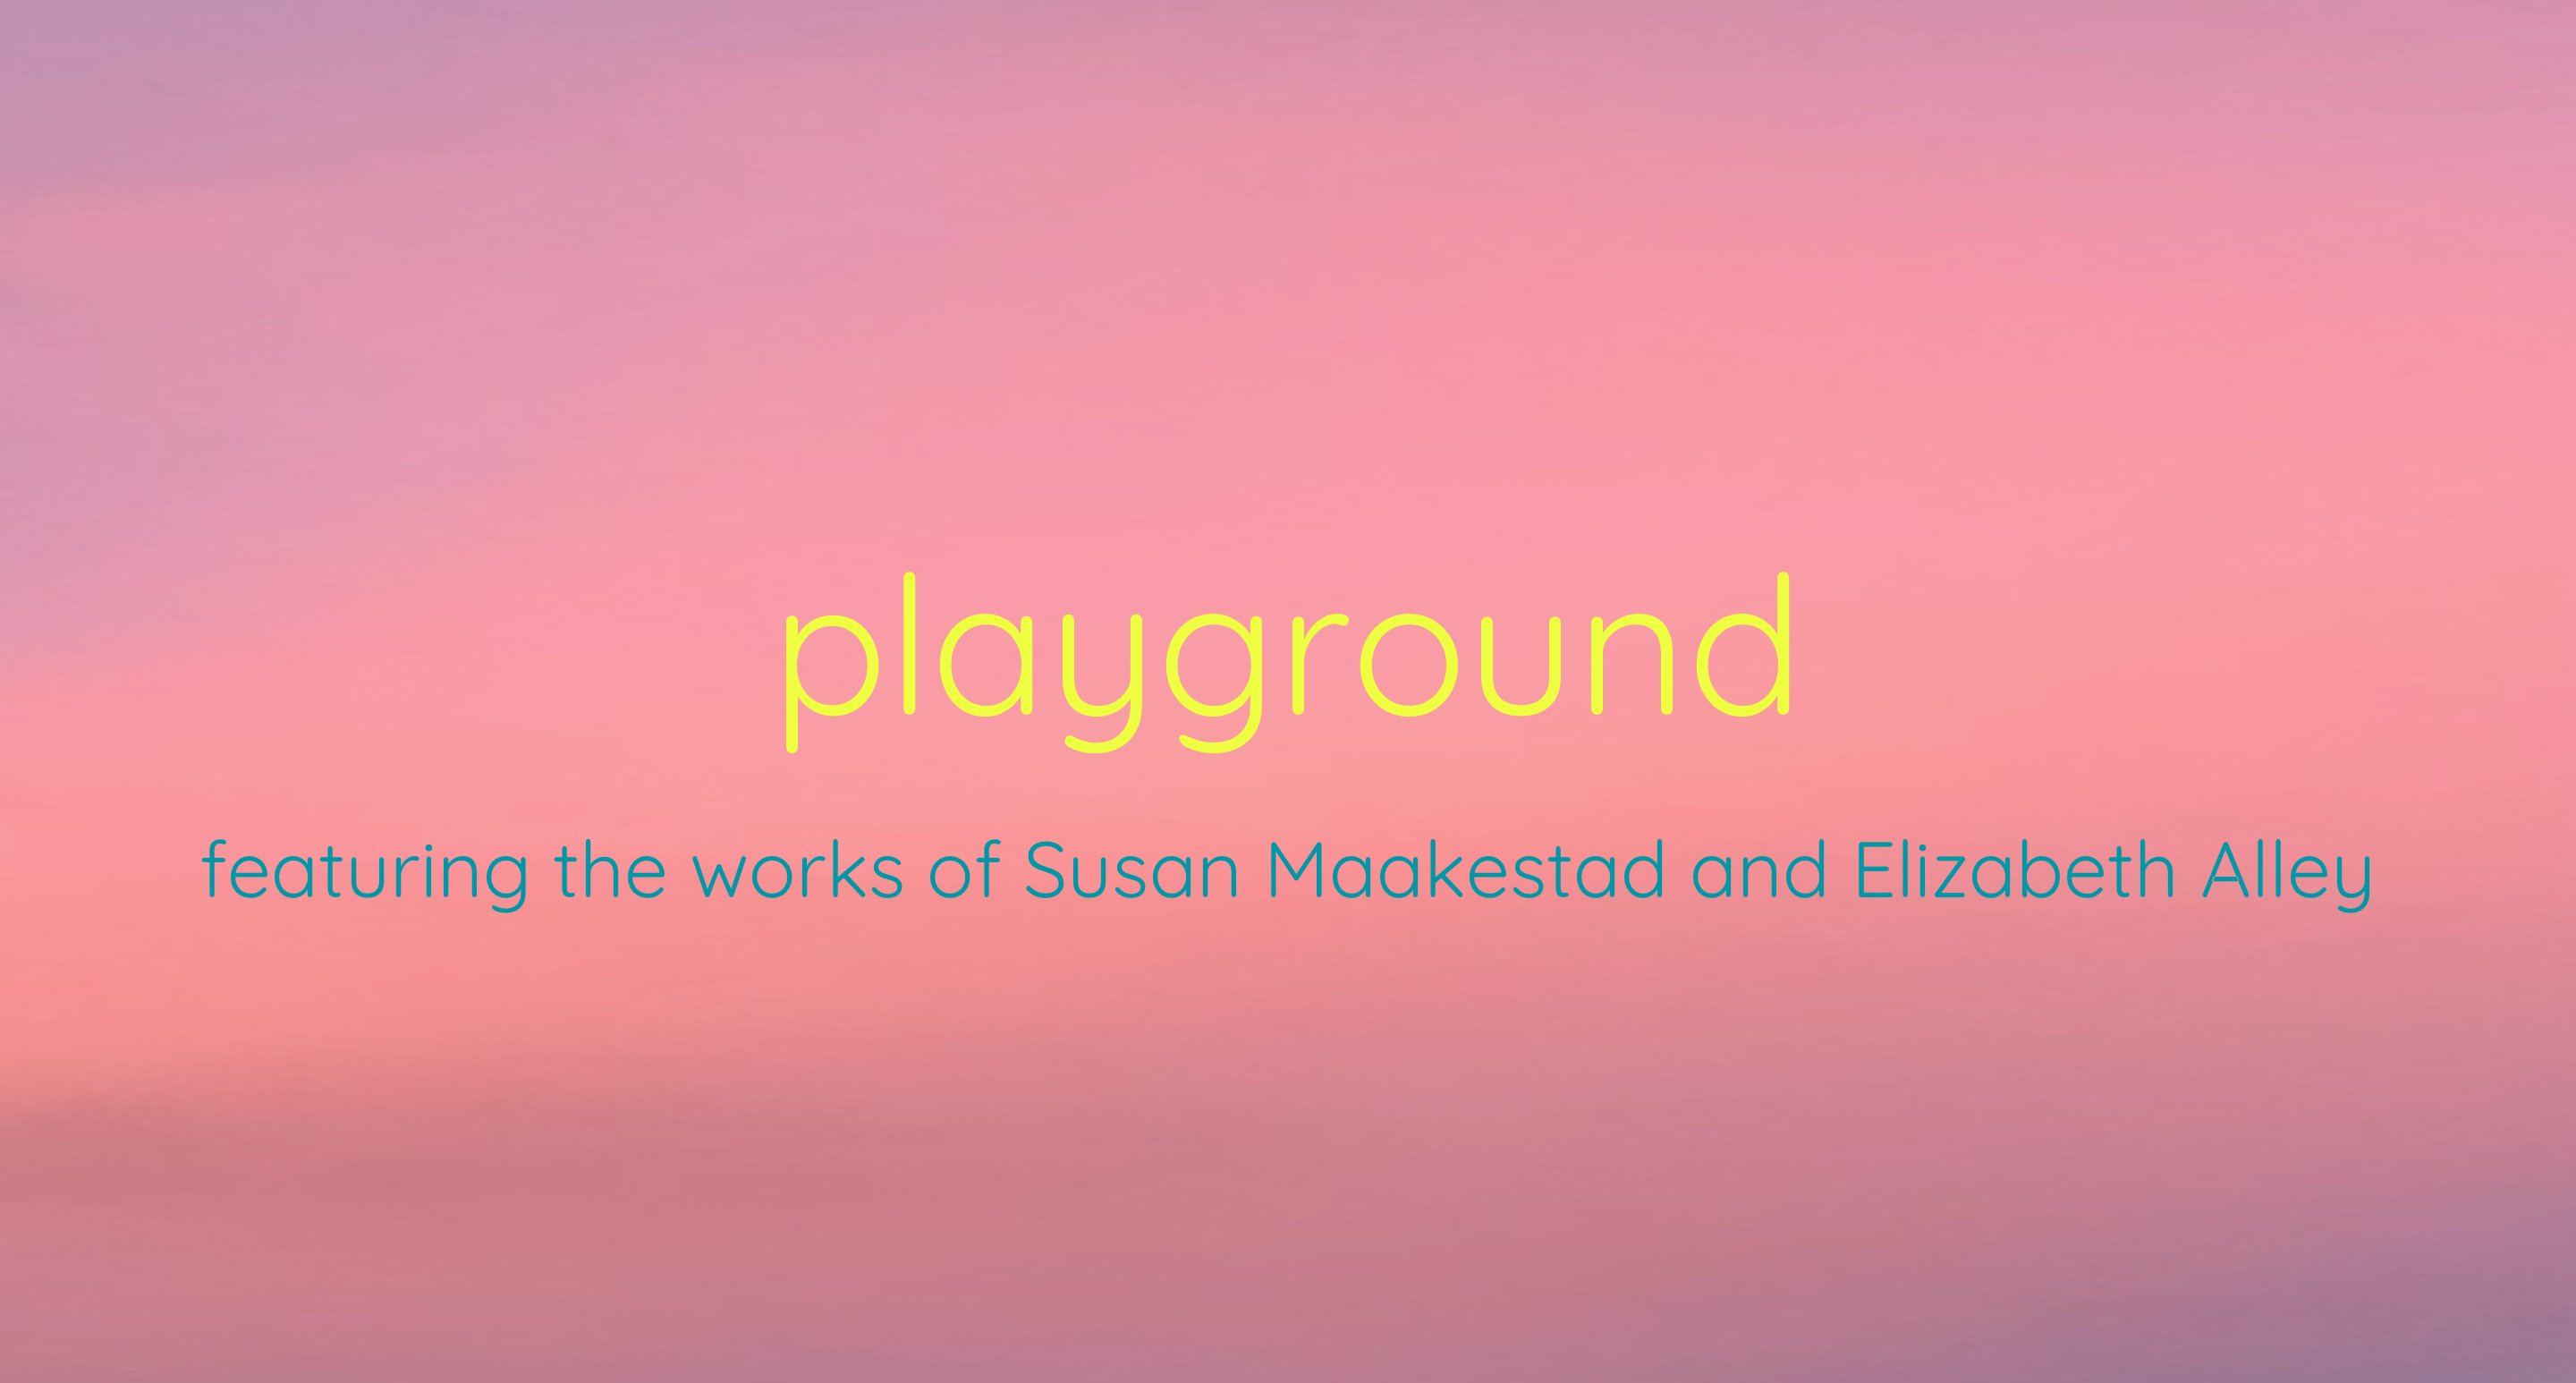 title card of playground exhibition